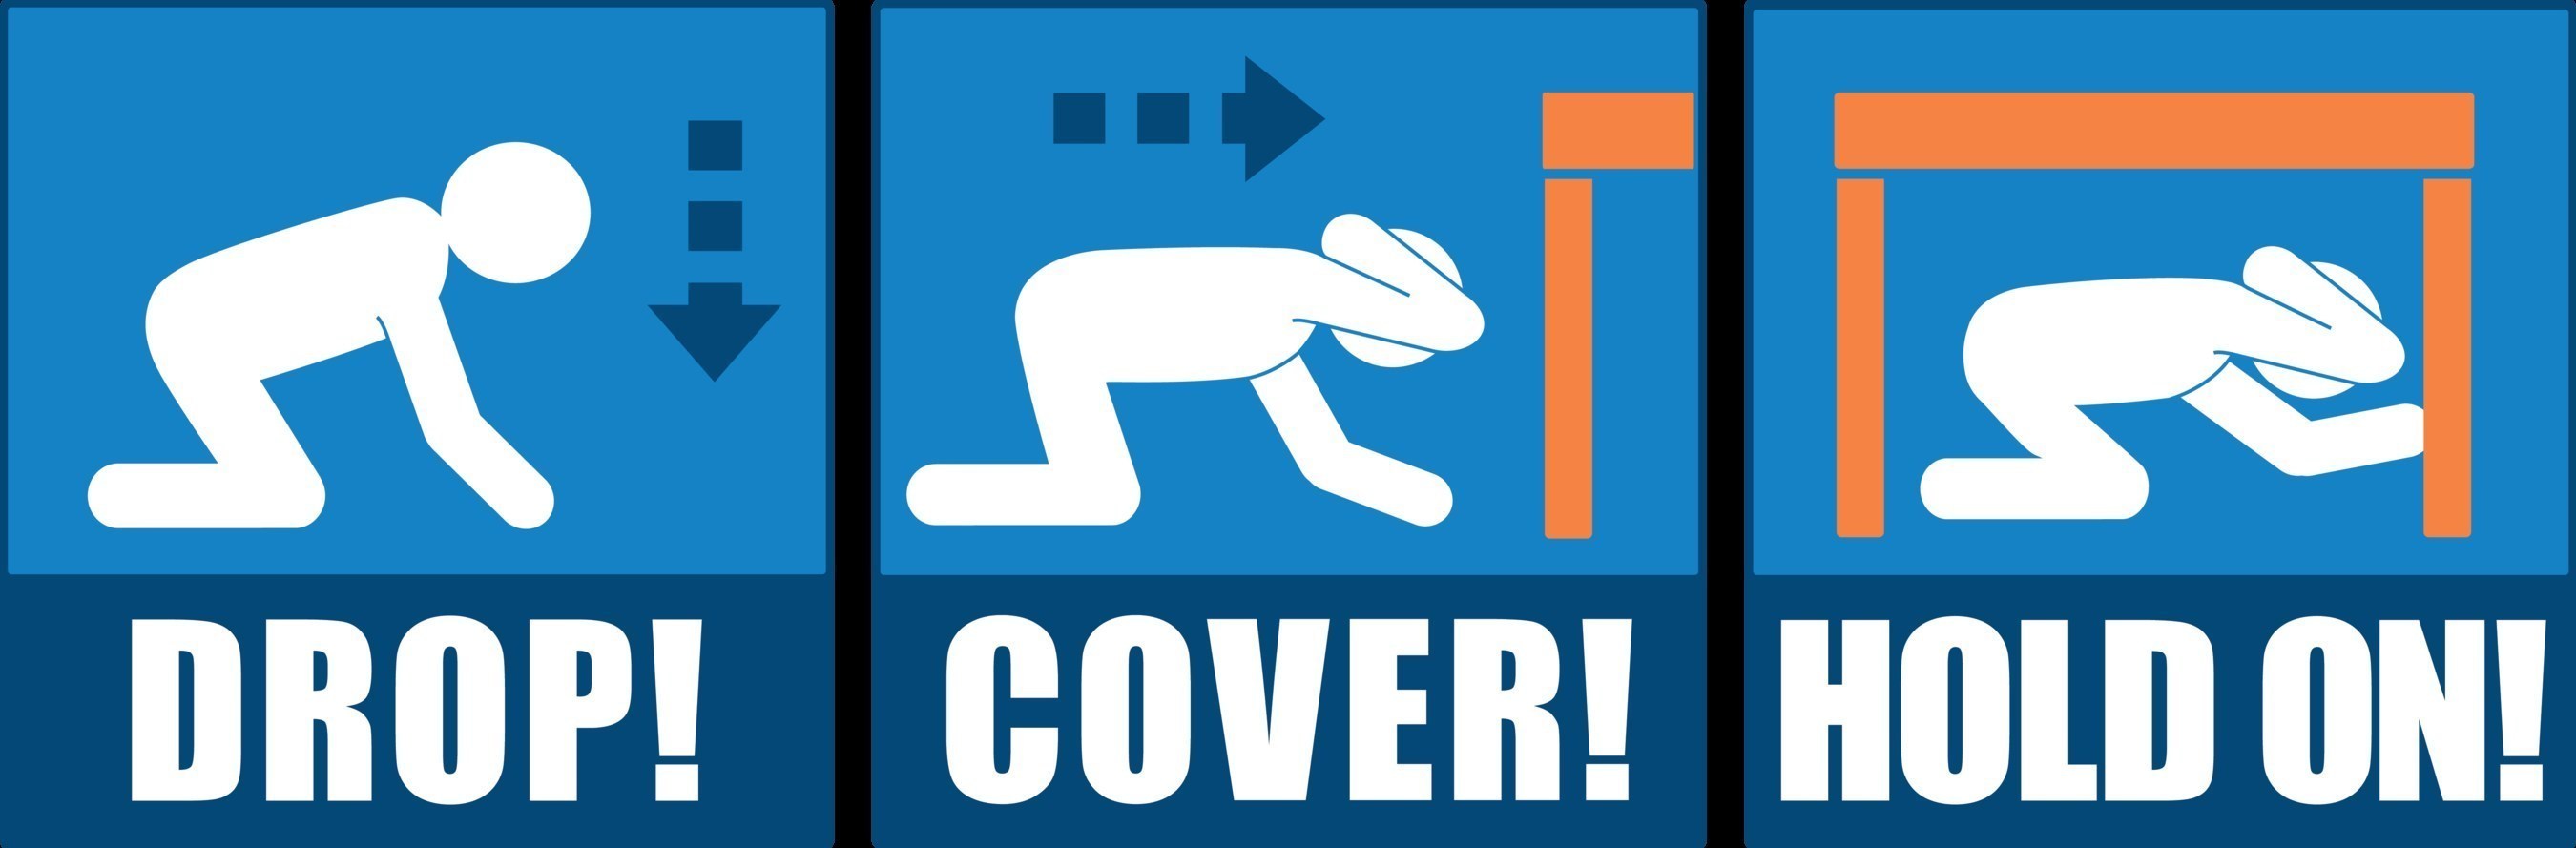 Great ShakeOut Earthquake Drills / Drop, Cover, and Hold On image